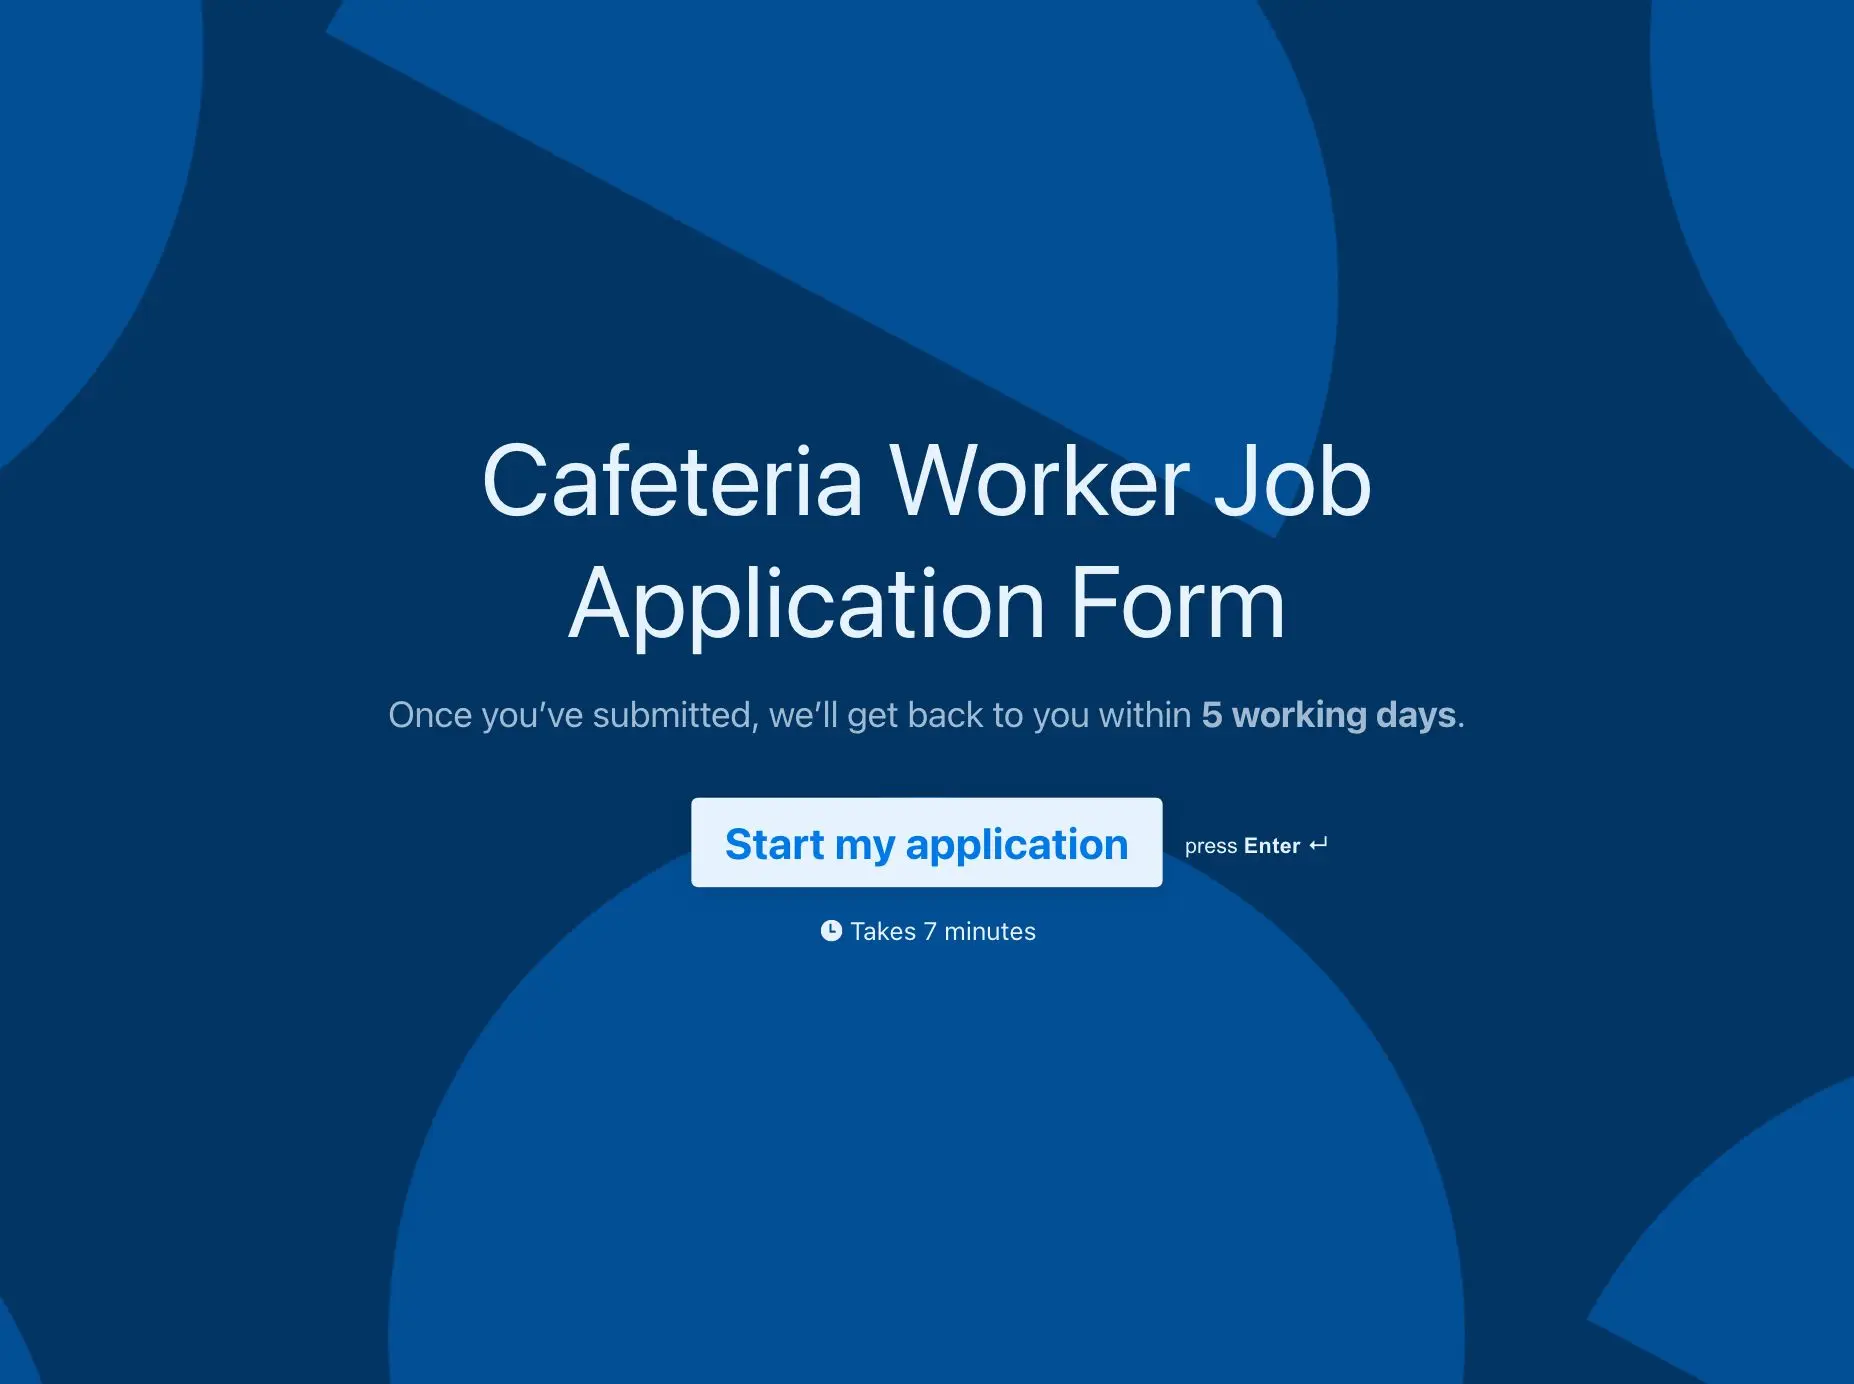 Cafeteria Worker Job Application Form Template Hero